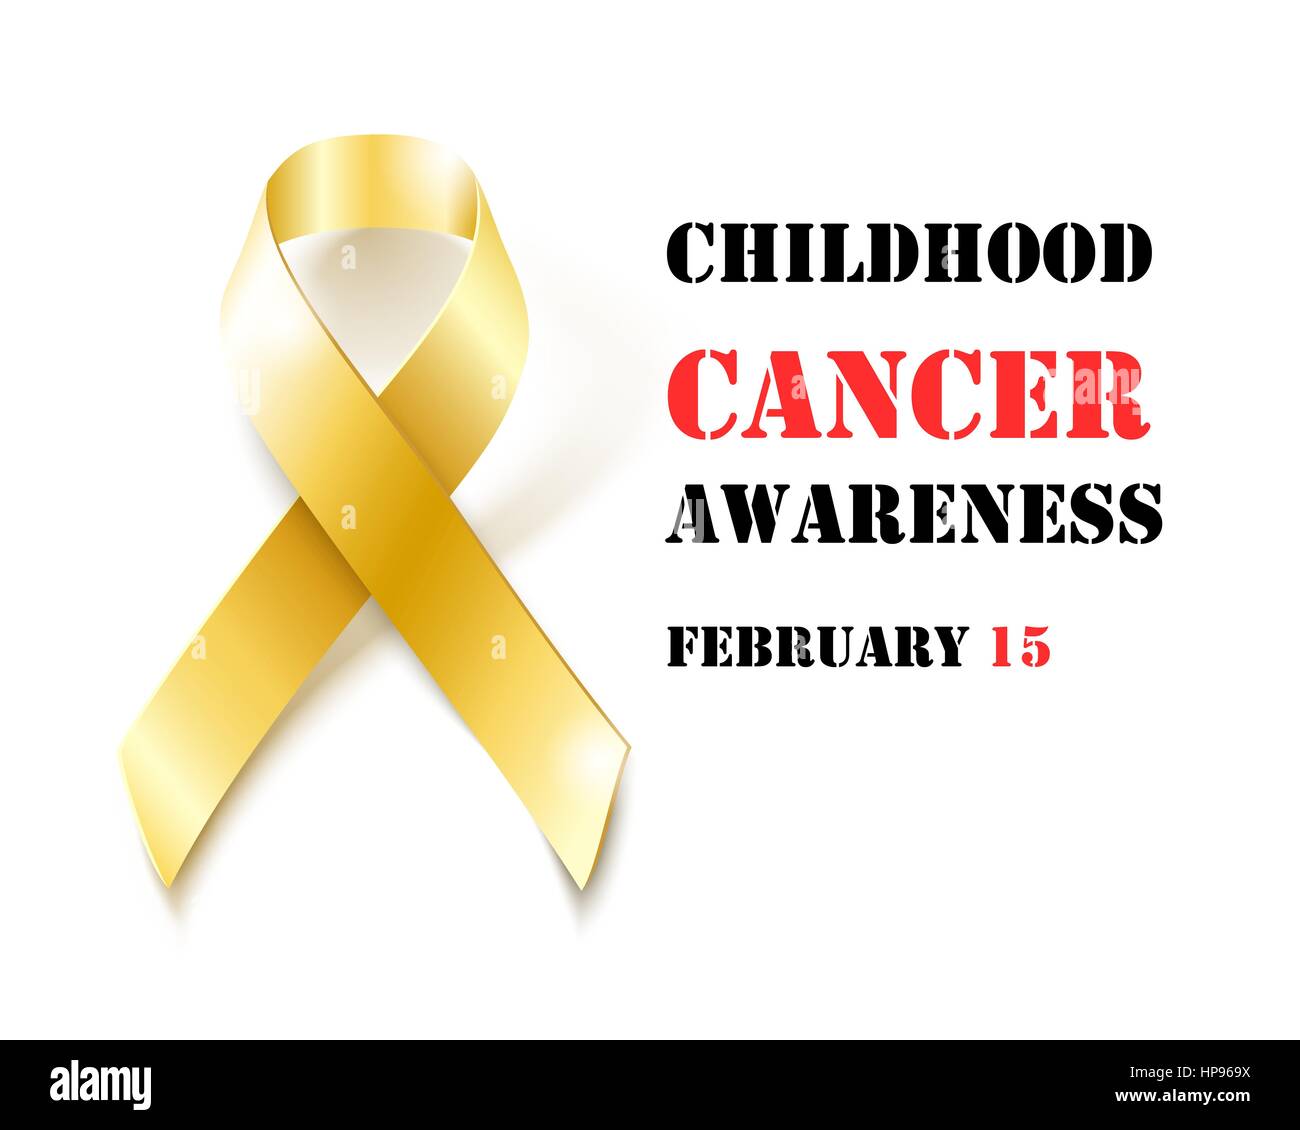 Childhood Cancer Awareness background with gold ribbon, vector illustration Stock Vector